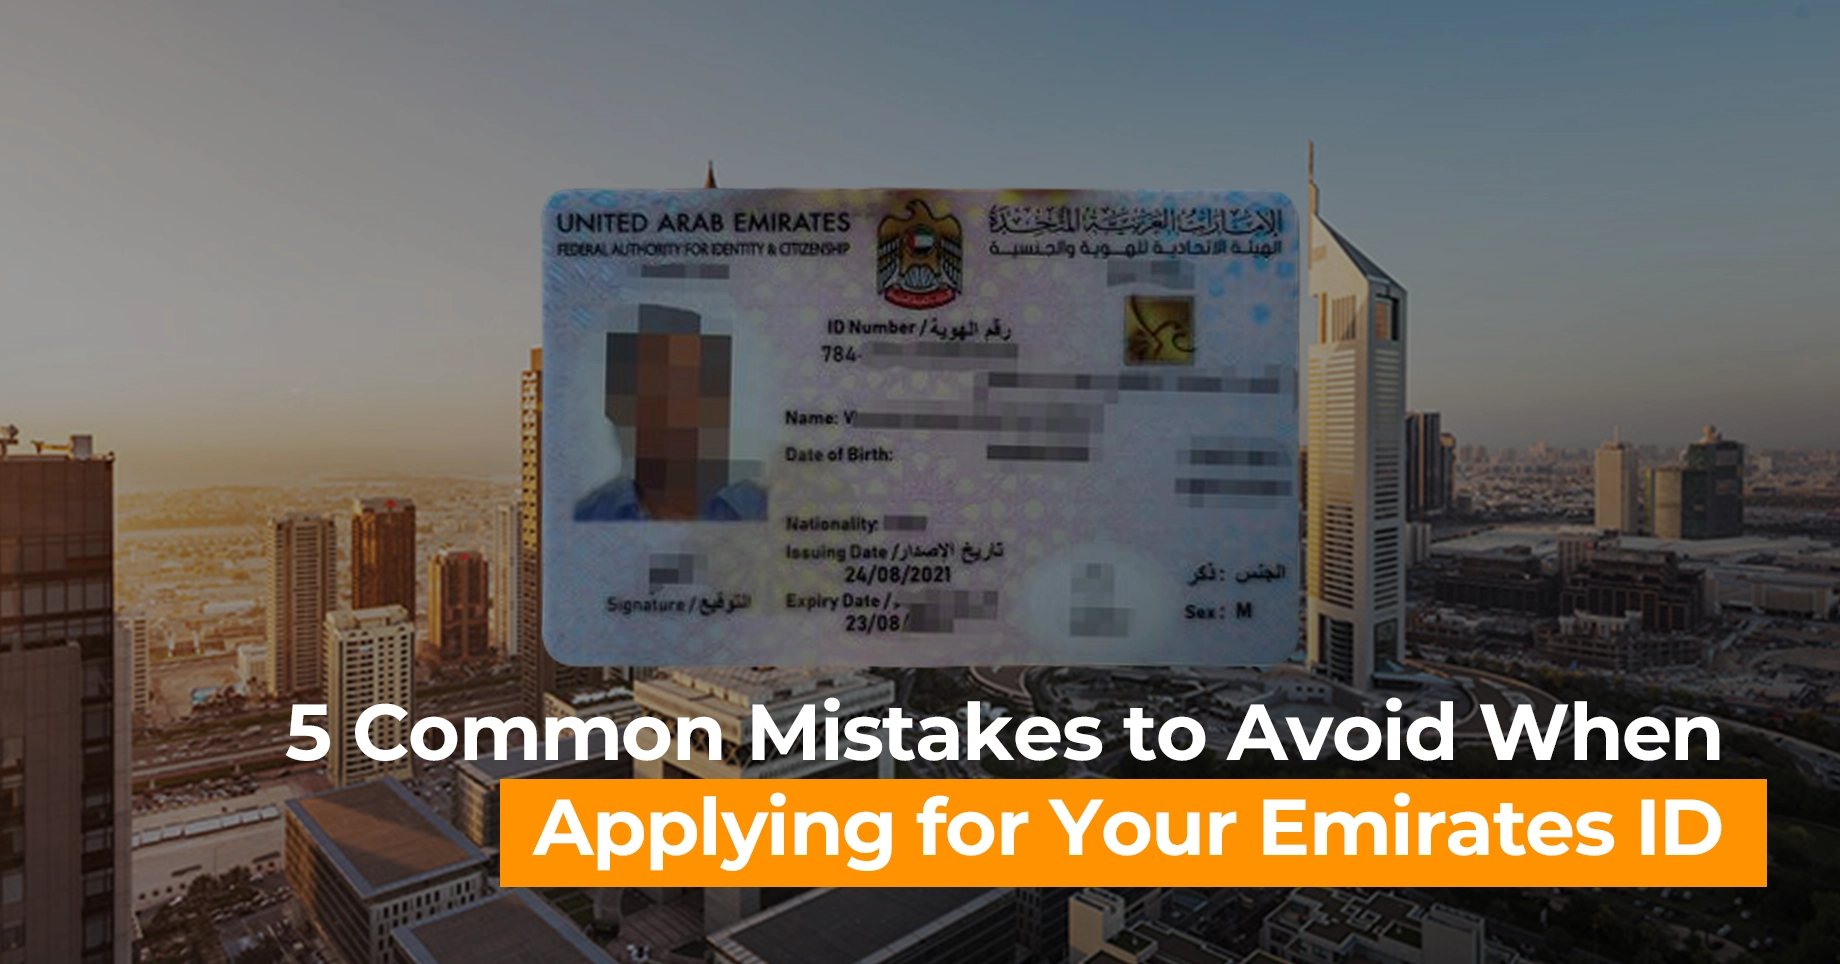 5 Common Mistakes to Avoid When Applying for Your Emirates ID